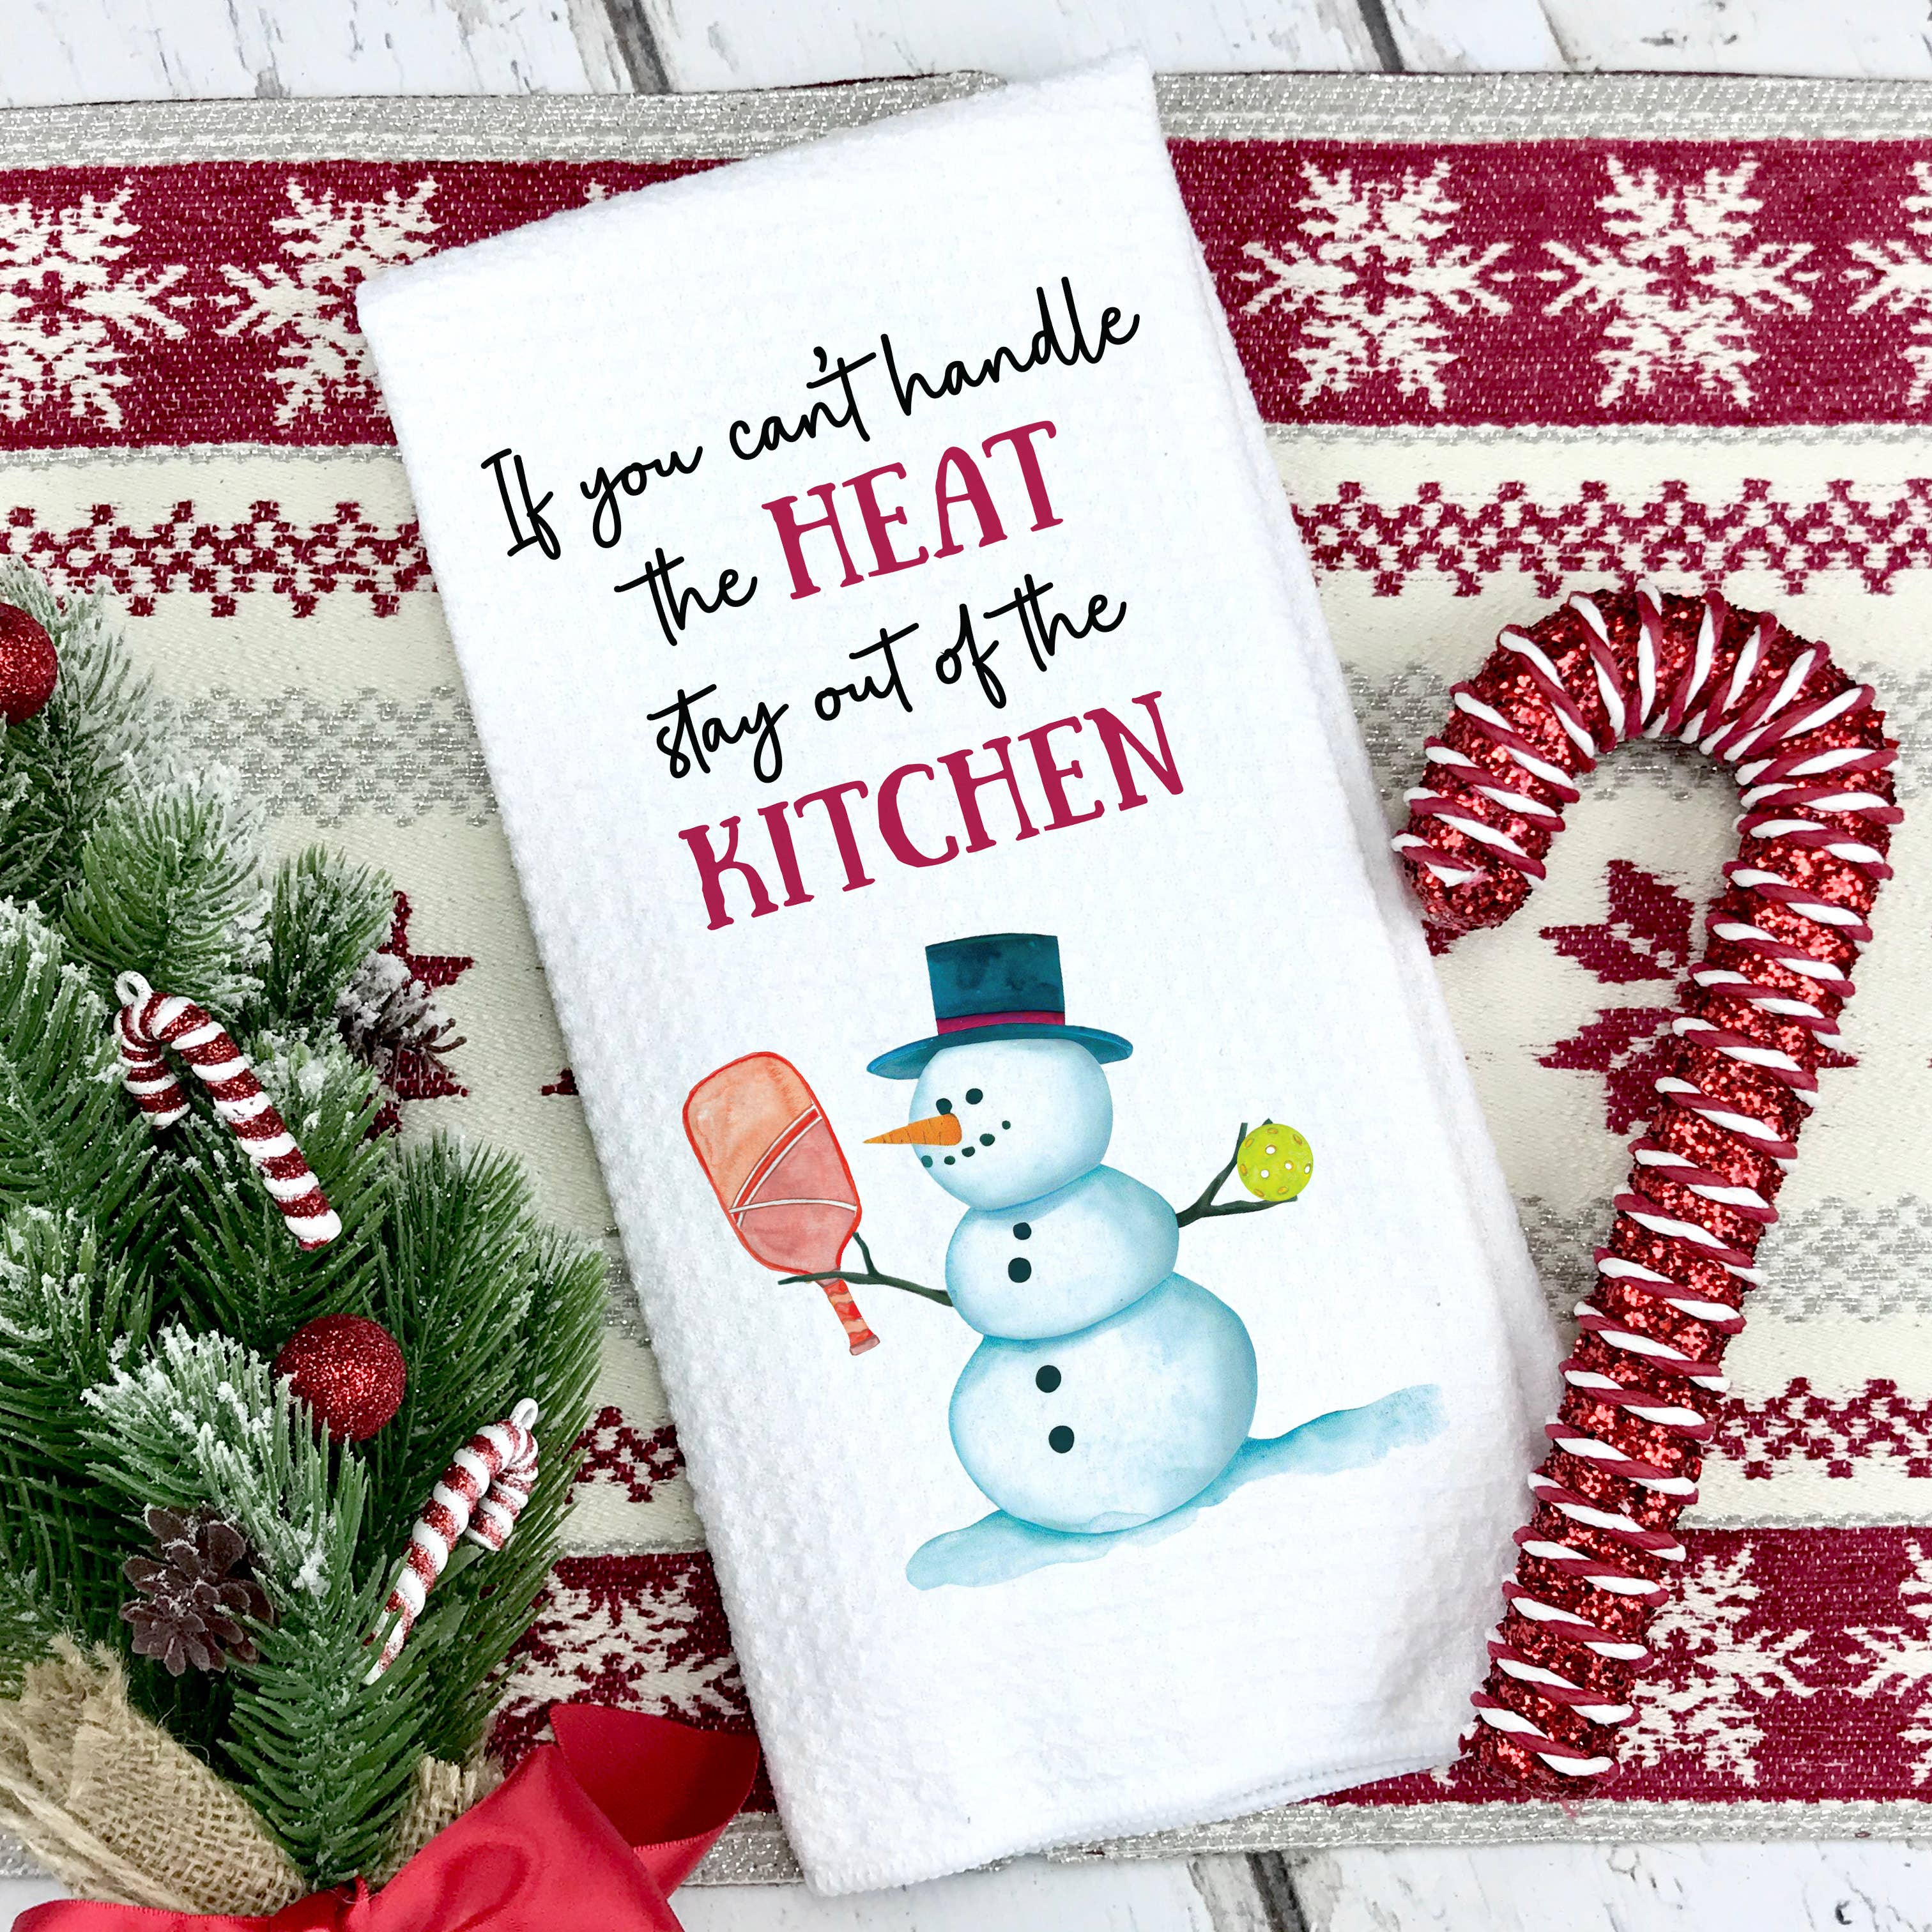 Can't Handle the Heat Snowman Towel, Pickleball Towel Gift - Clearance